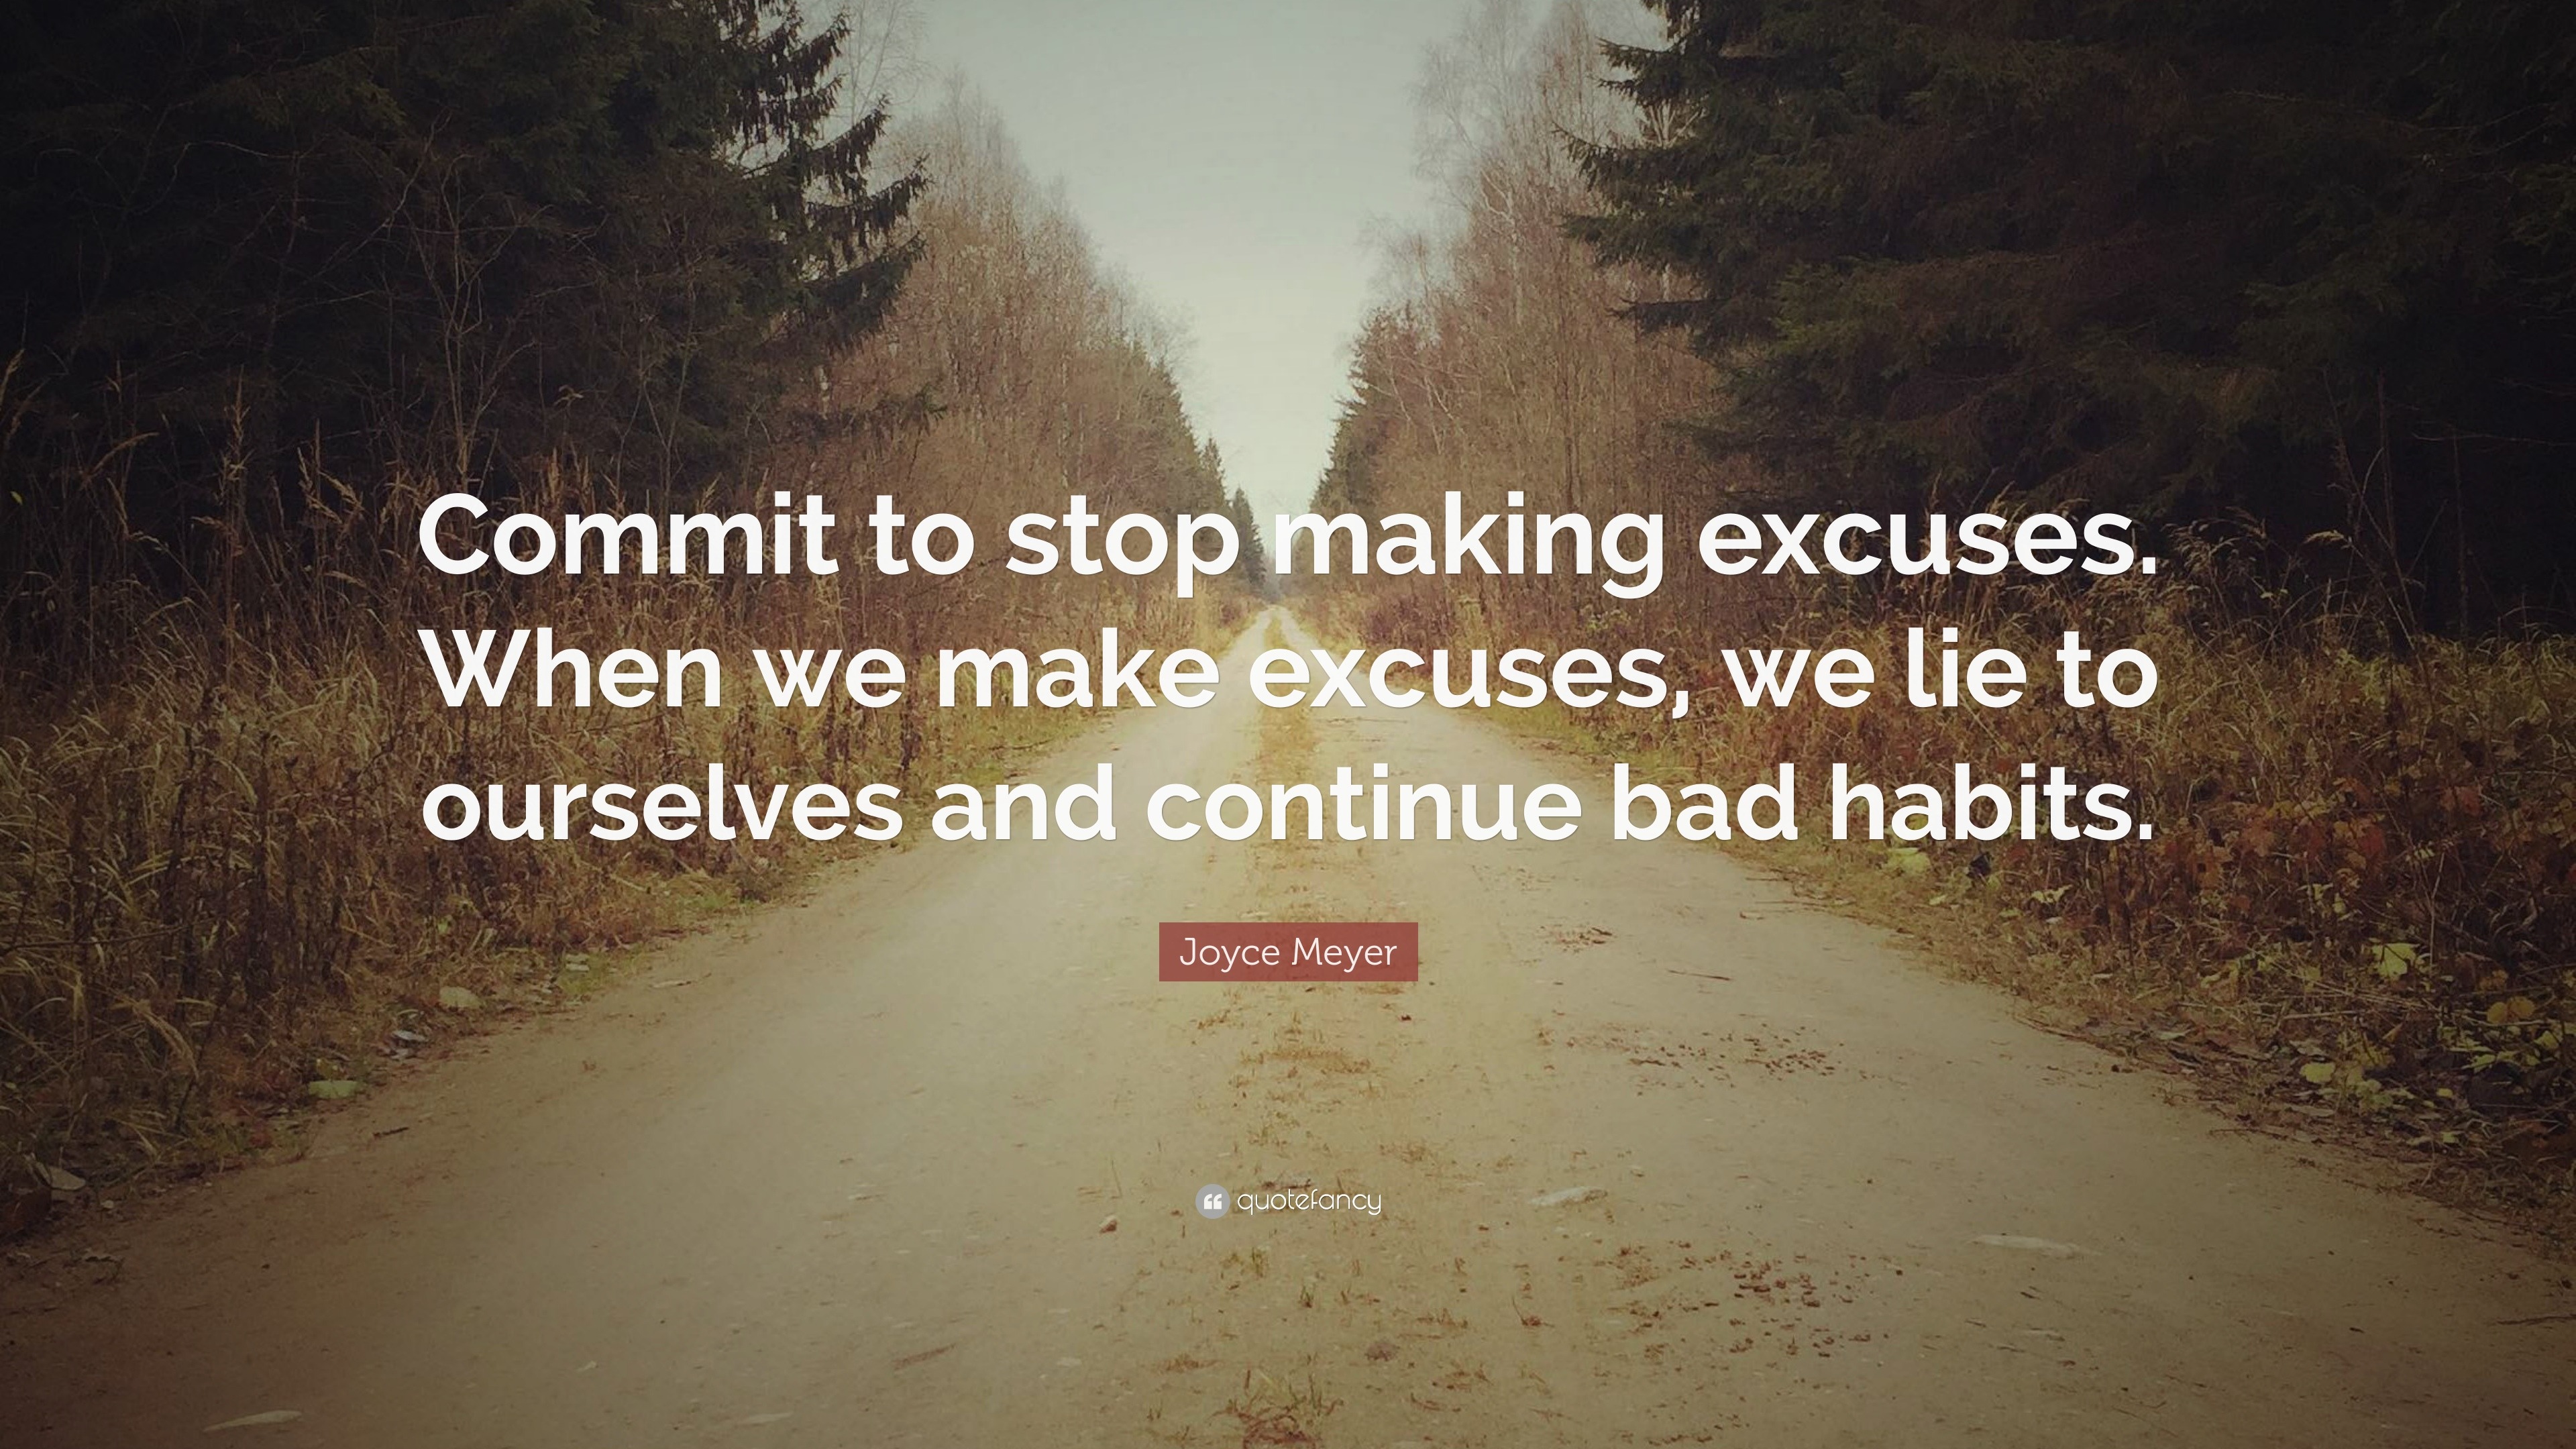 Joyce Meyer Quote “commit To Stop Making Excuses When We Make Excuses We Lie To Ourselves And